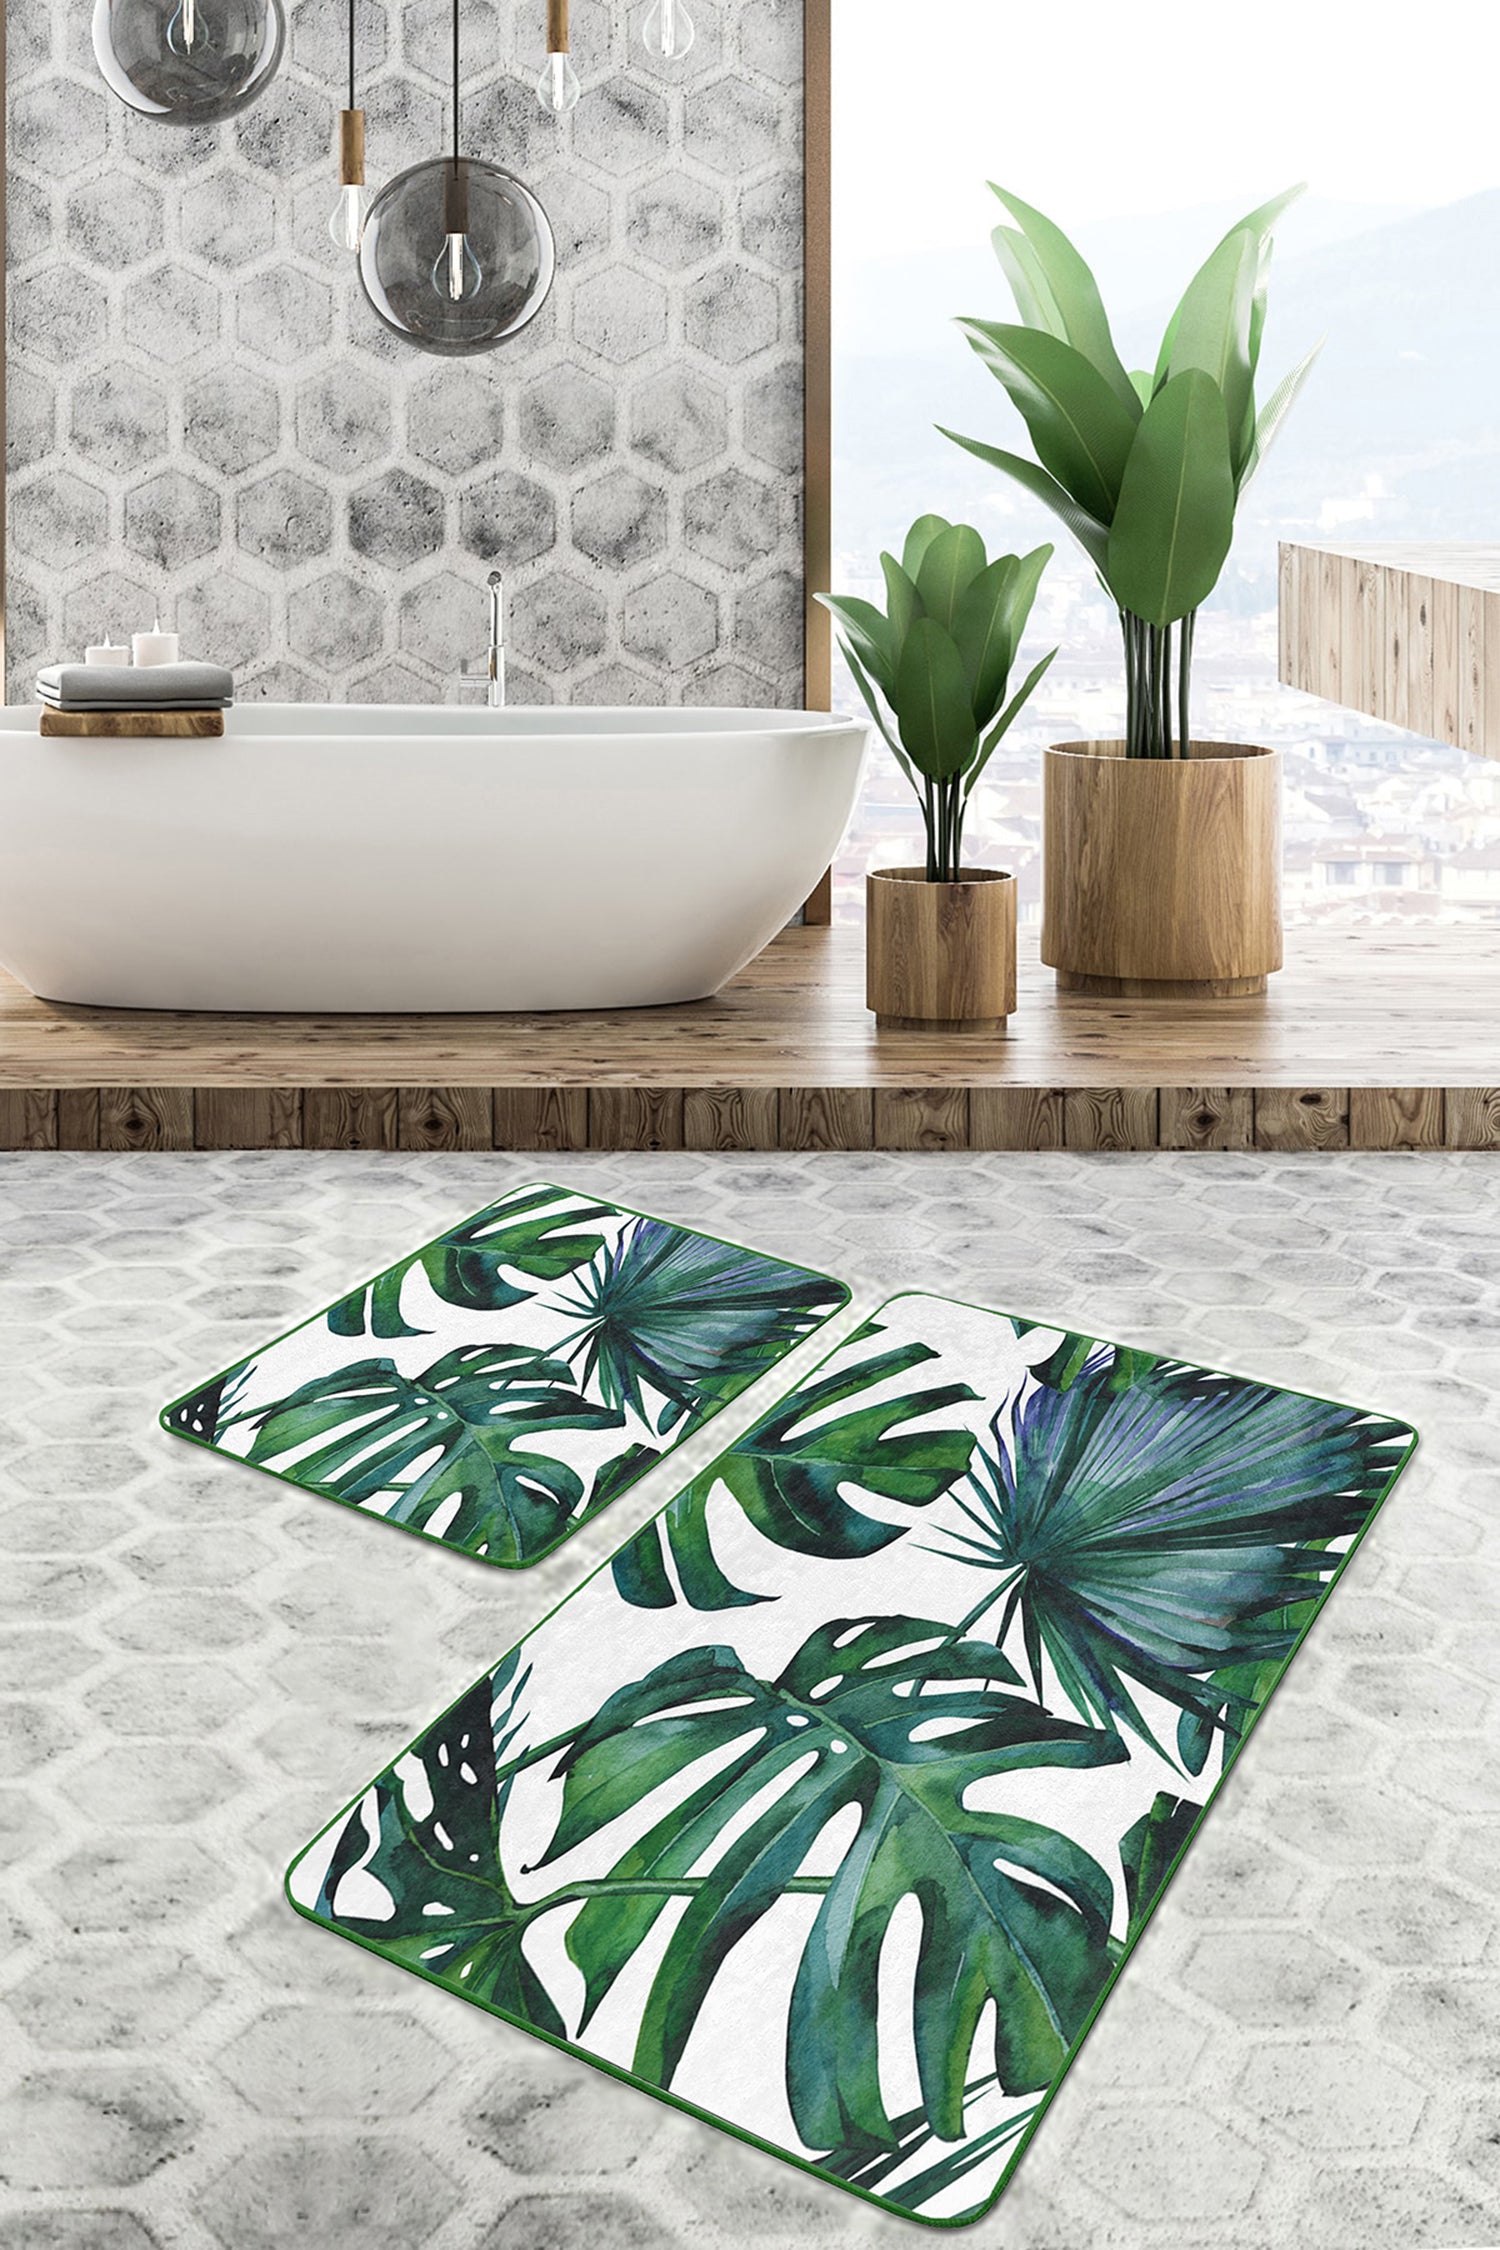 Green Floral Design Bath Mat Set for a Refreshing and Stylish Bathroom